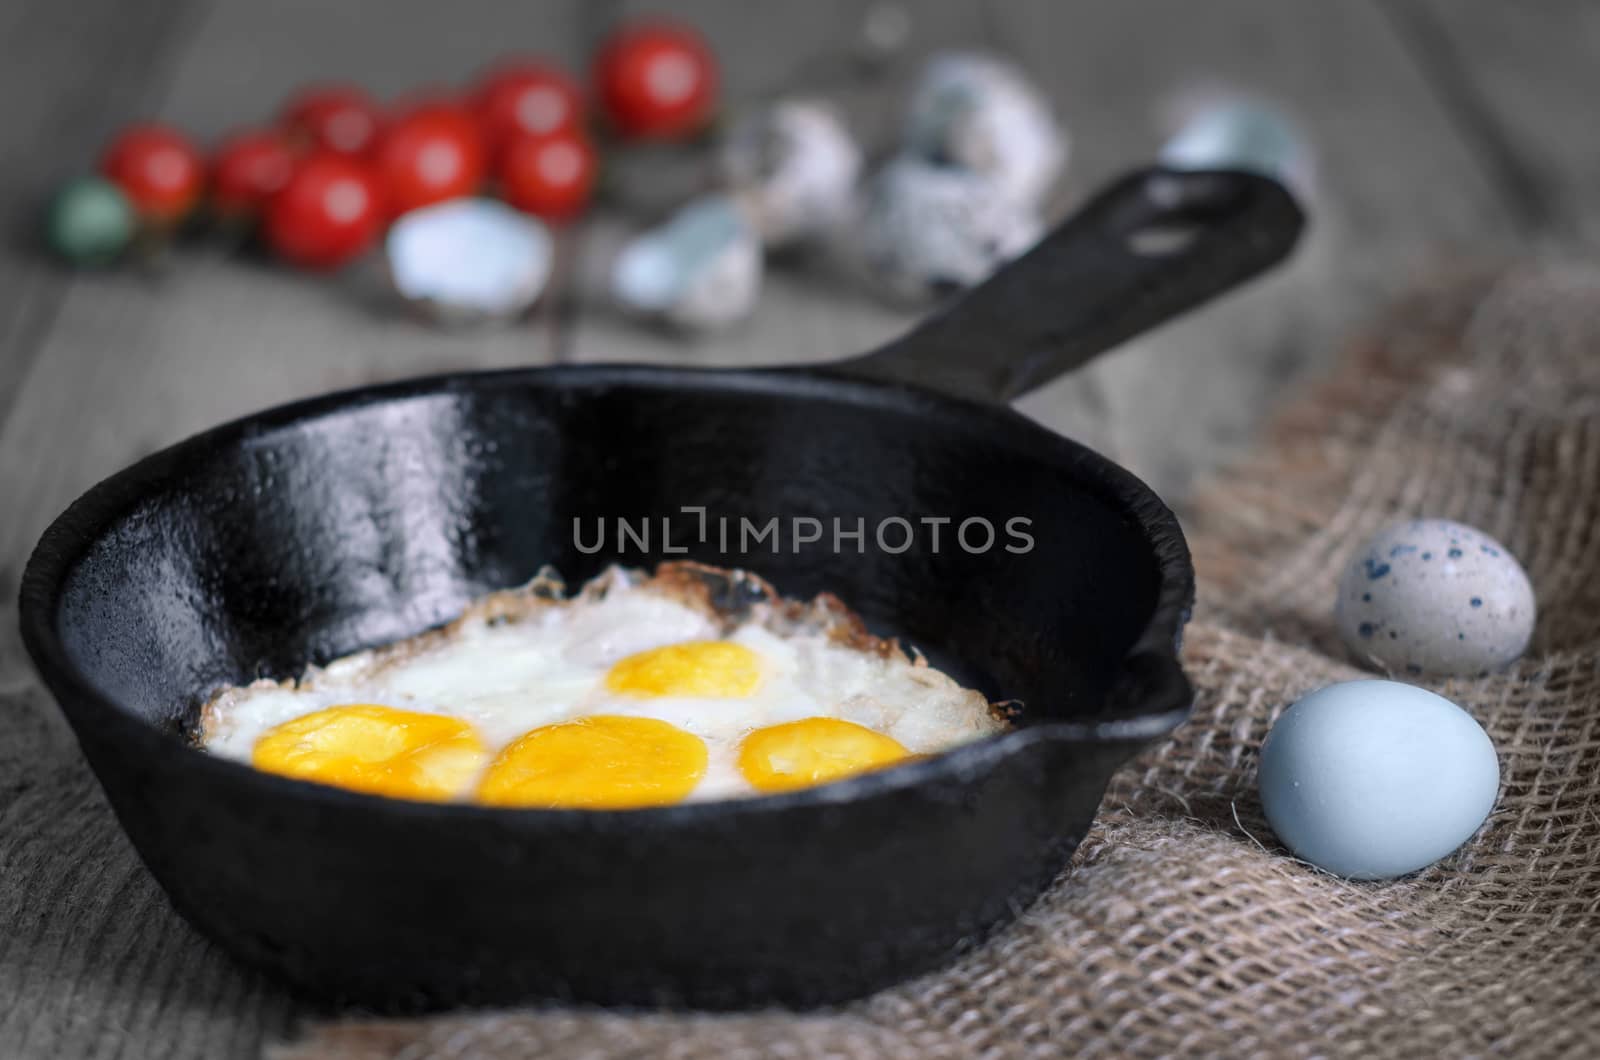 Fried quail eggs on a cast iron skillet, the old wooden background. Small tomatoes and whole eggs. The rustic style.